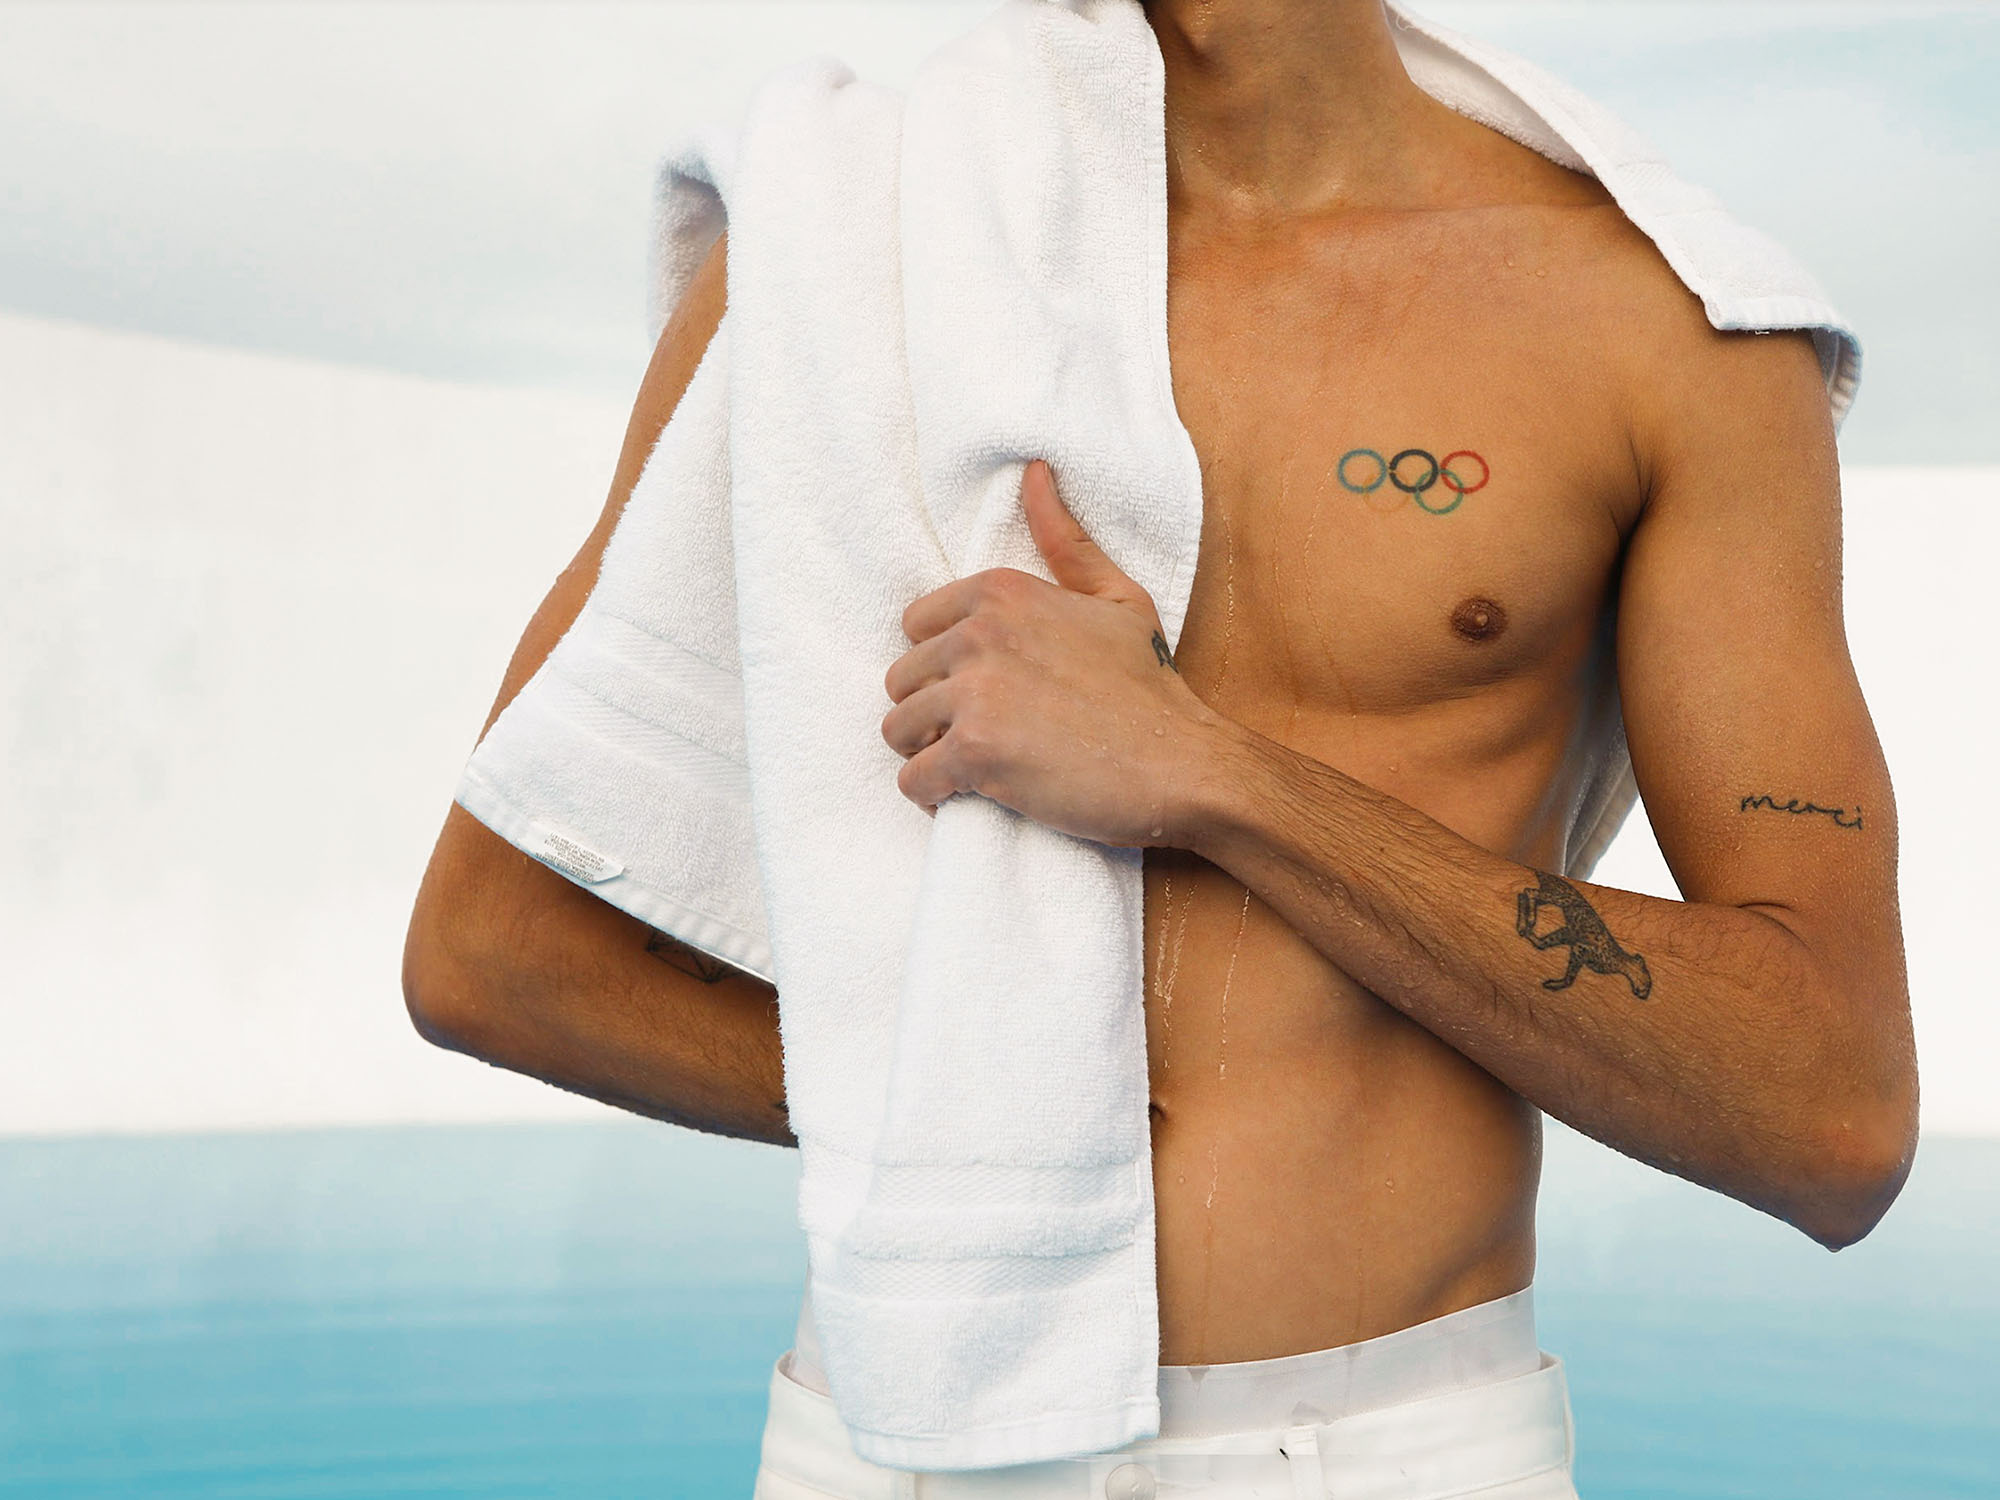 Shirtless man holding a towel over his shoulder